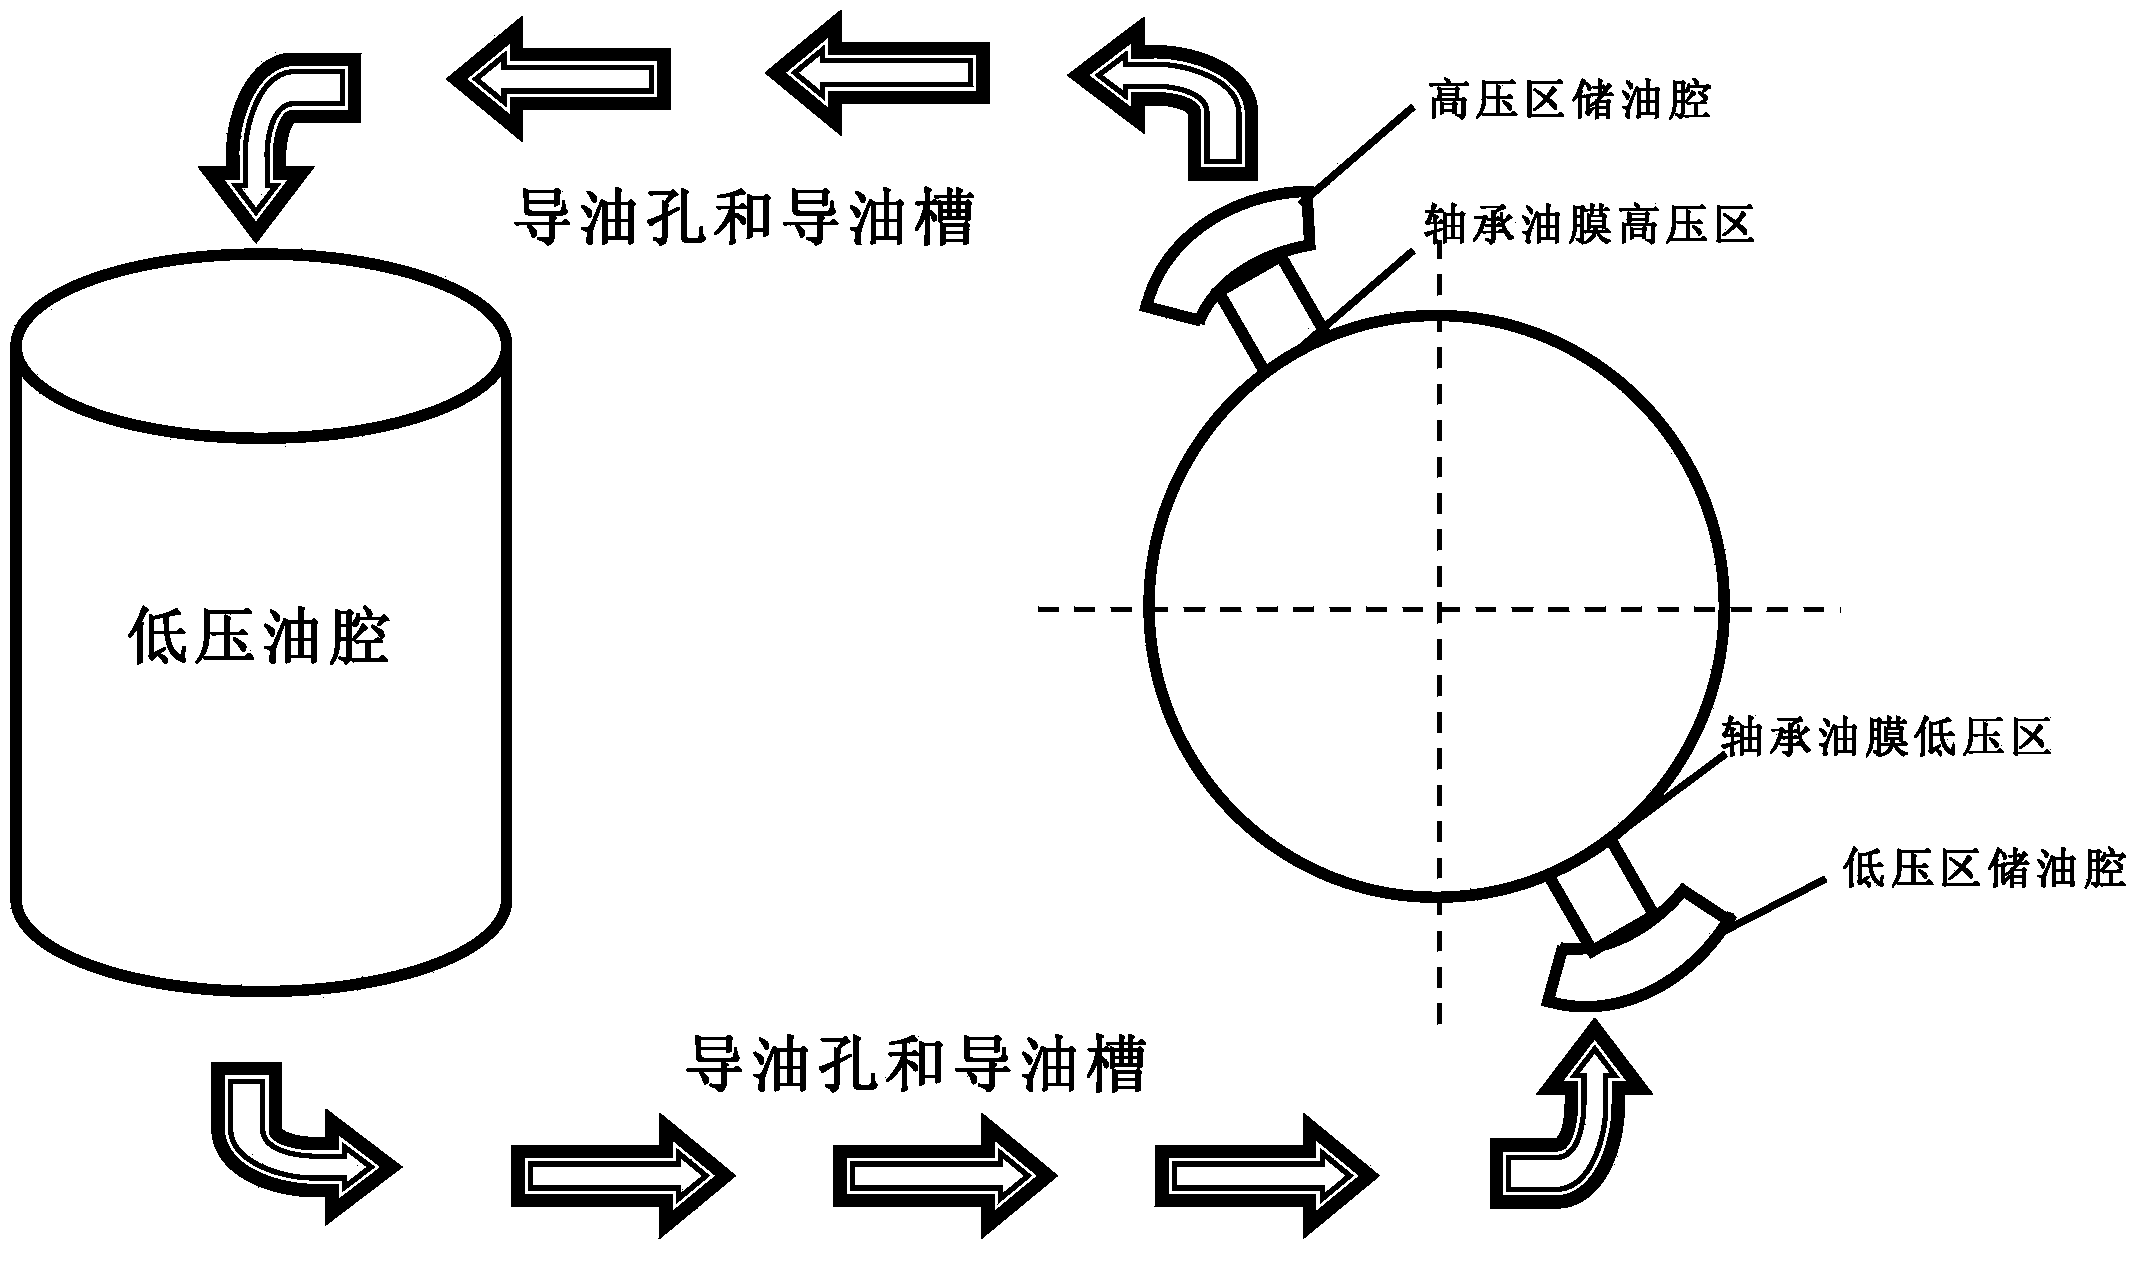 Self-circulating cooling oil lubrication system for sliding bearing for meshing gear pump